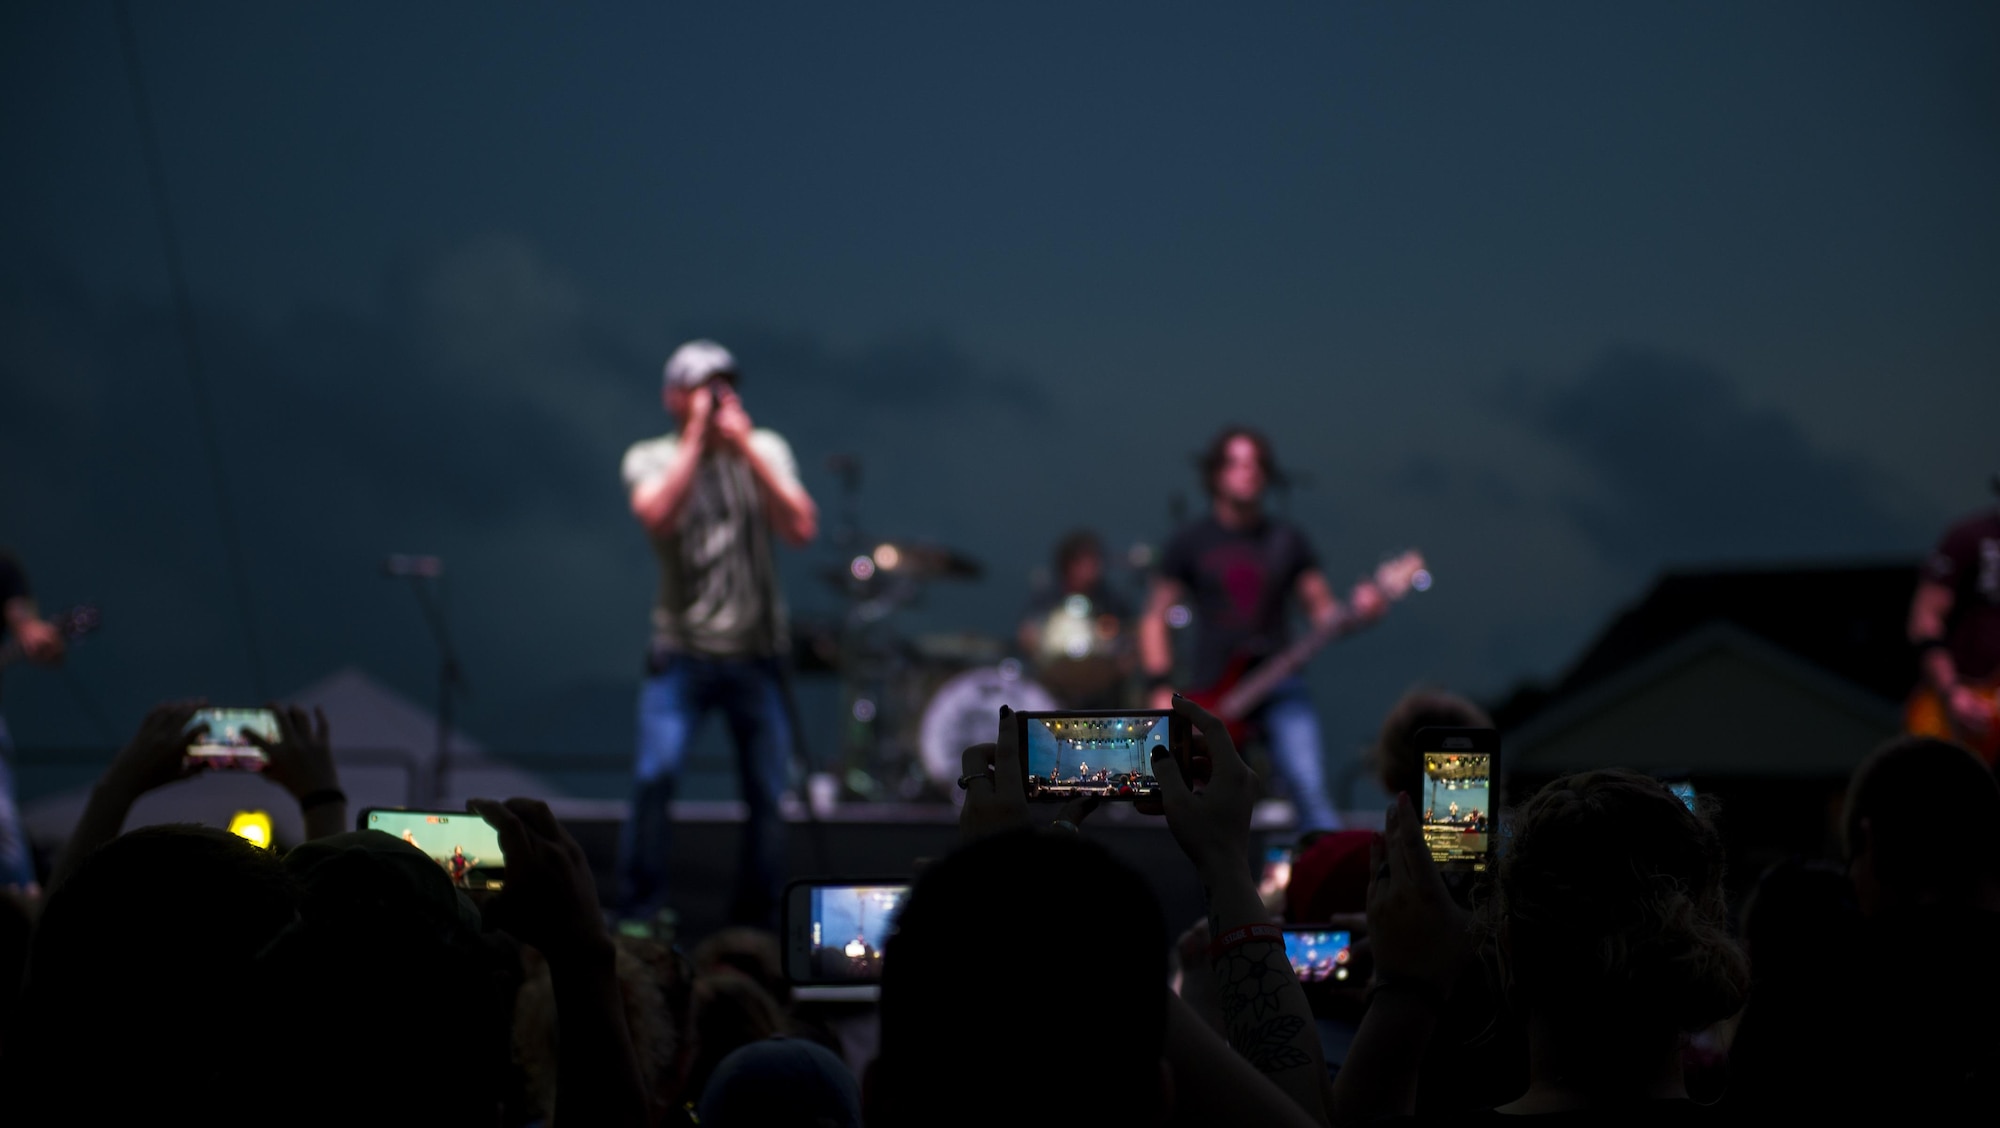 Rock Band 3 Doors Down performs for Air Commandos during Freedom Fest at Hurlburt Field, Fla., June 27, 2017. Events like Freedom Fest are designed to build resilience at Hurlburt Field, the most deployed base in the Air Force, by focusing on family and friends while celebrating our nation's independence.